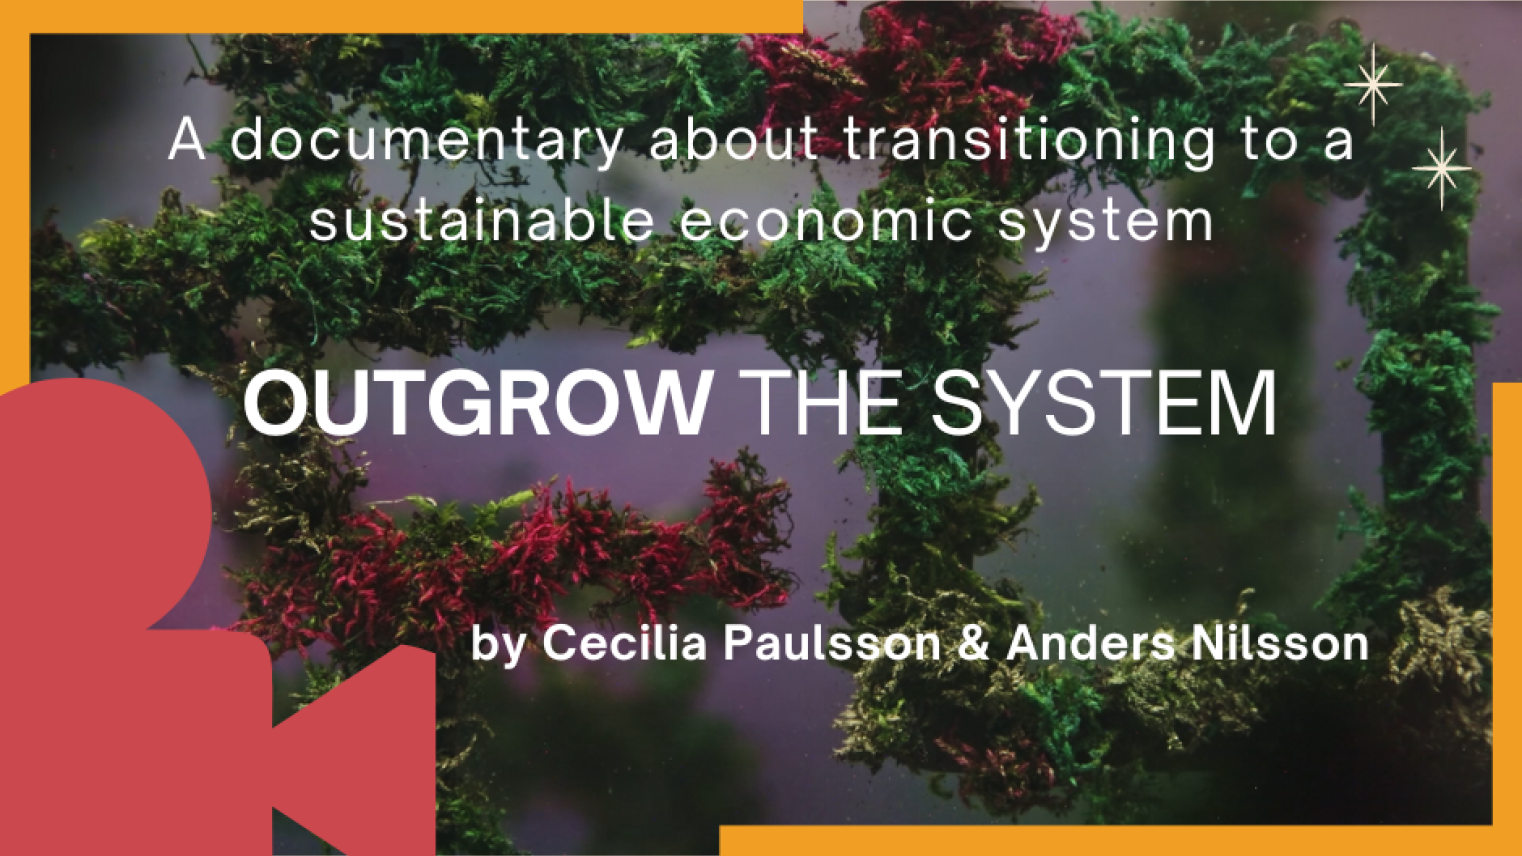 Outgrow the System film poster